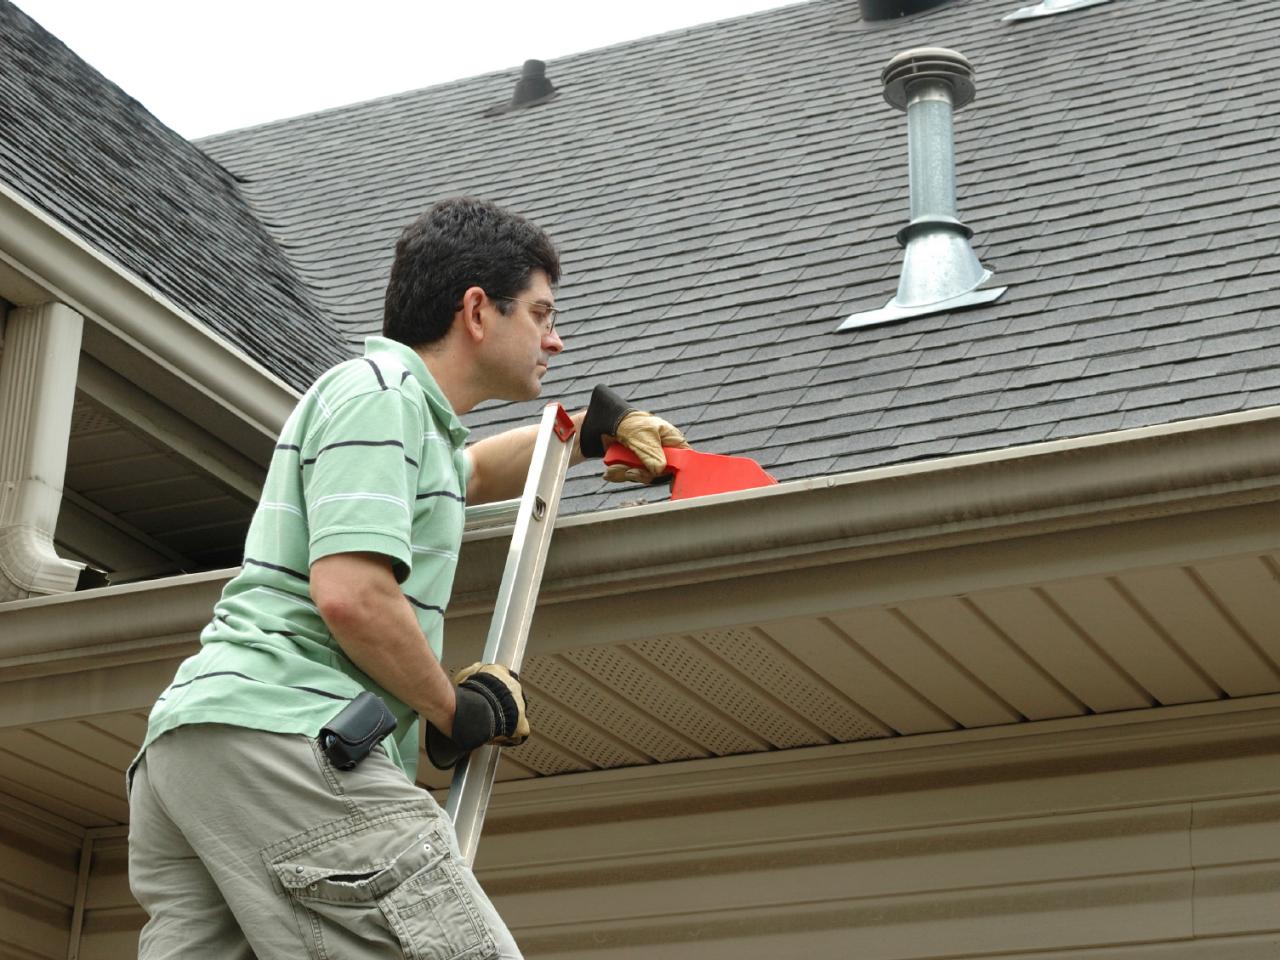 Gutter Cleaning Services Near Me